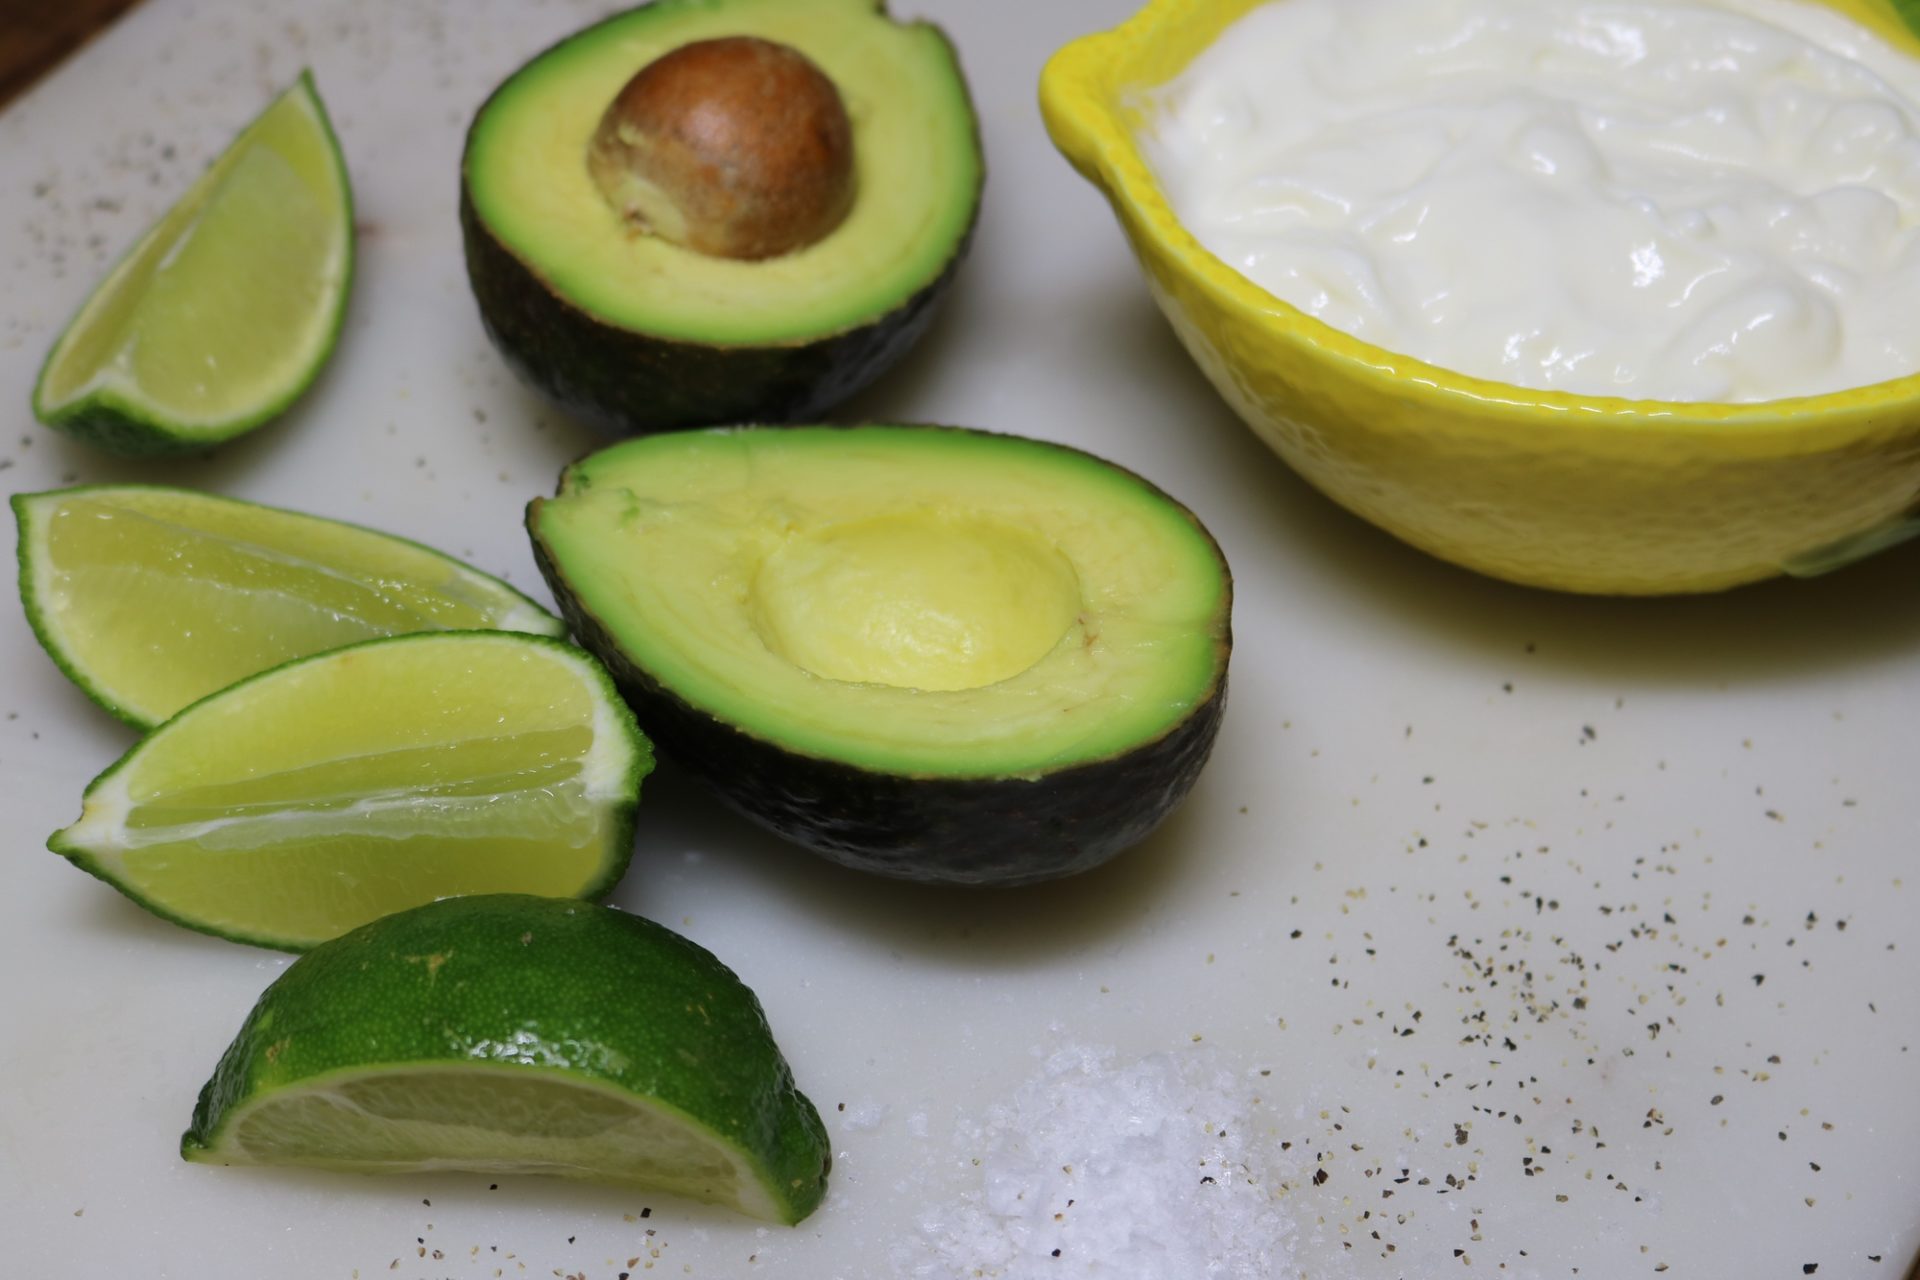 Avocado Crema - The simple topping that can turn an everyday meal into something magical! 1